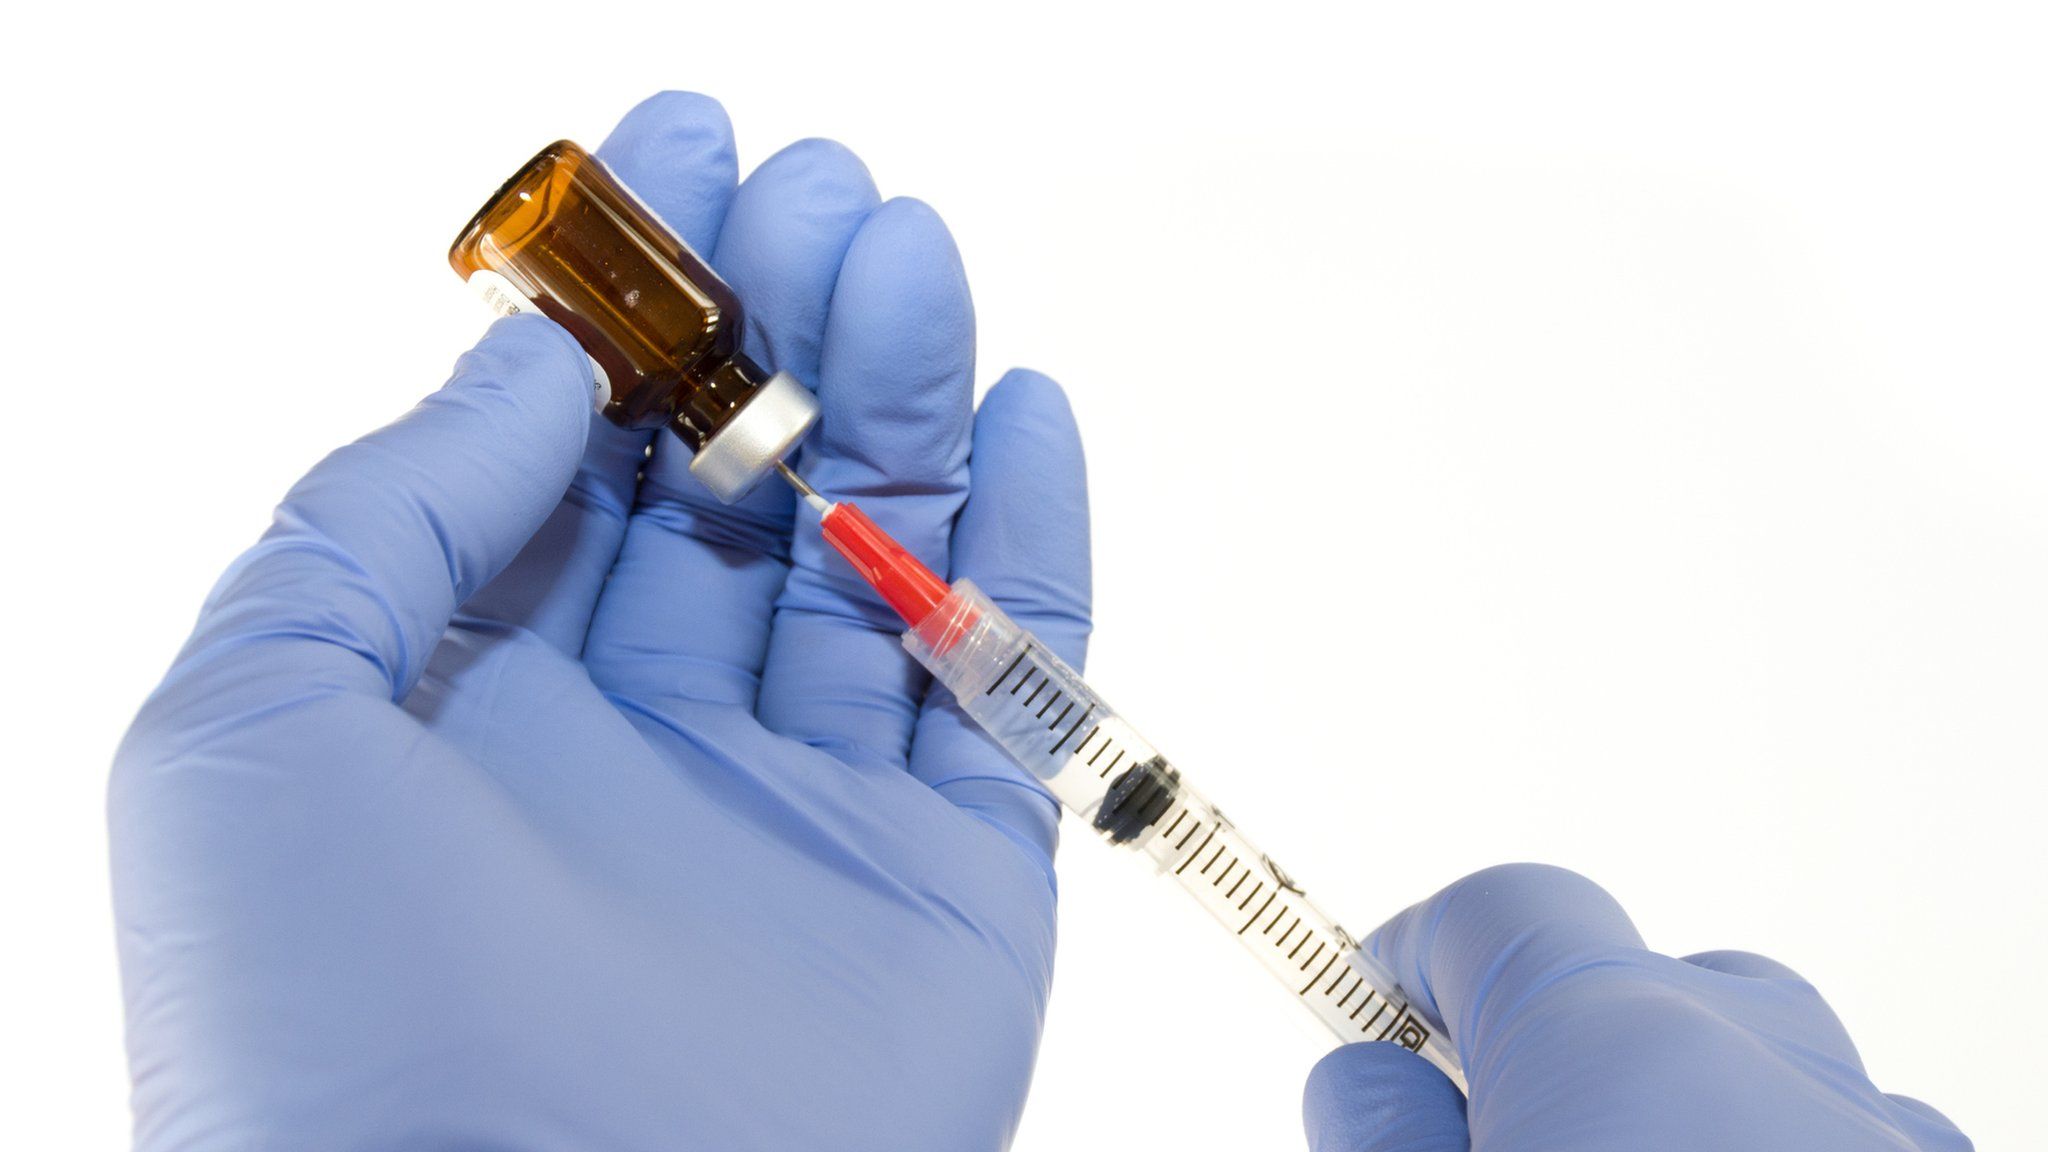 Preparing a steroid injection